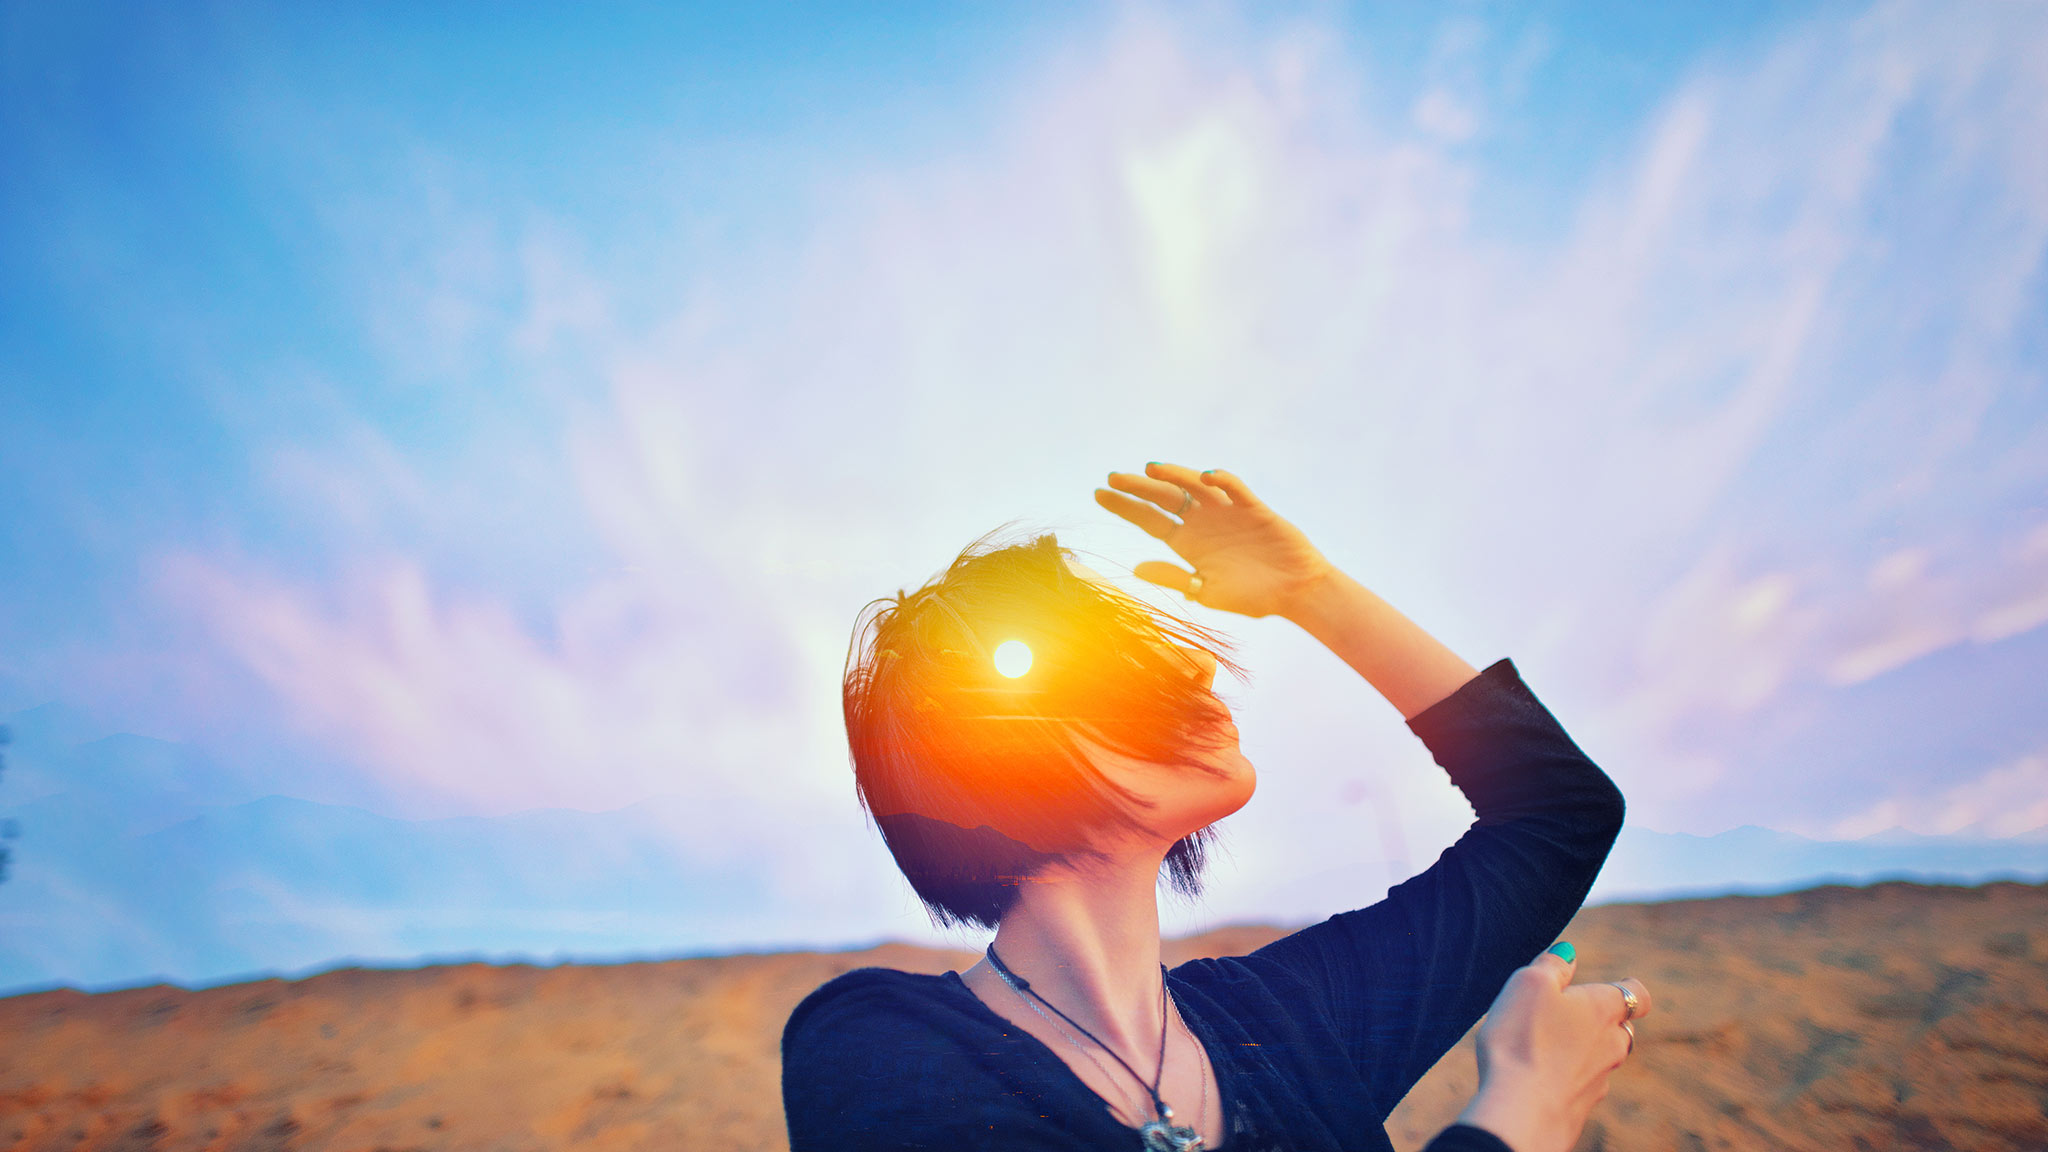 Head And Shoulders Photograph Of Woman Dancing On Beach With Sunrise Superimposed Over Her Head, Enlightenment Concept